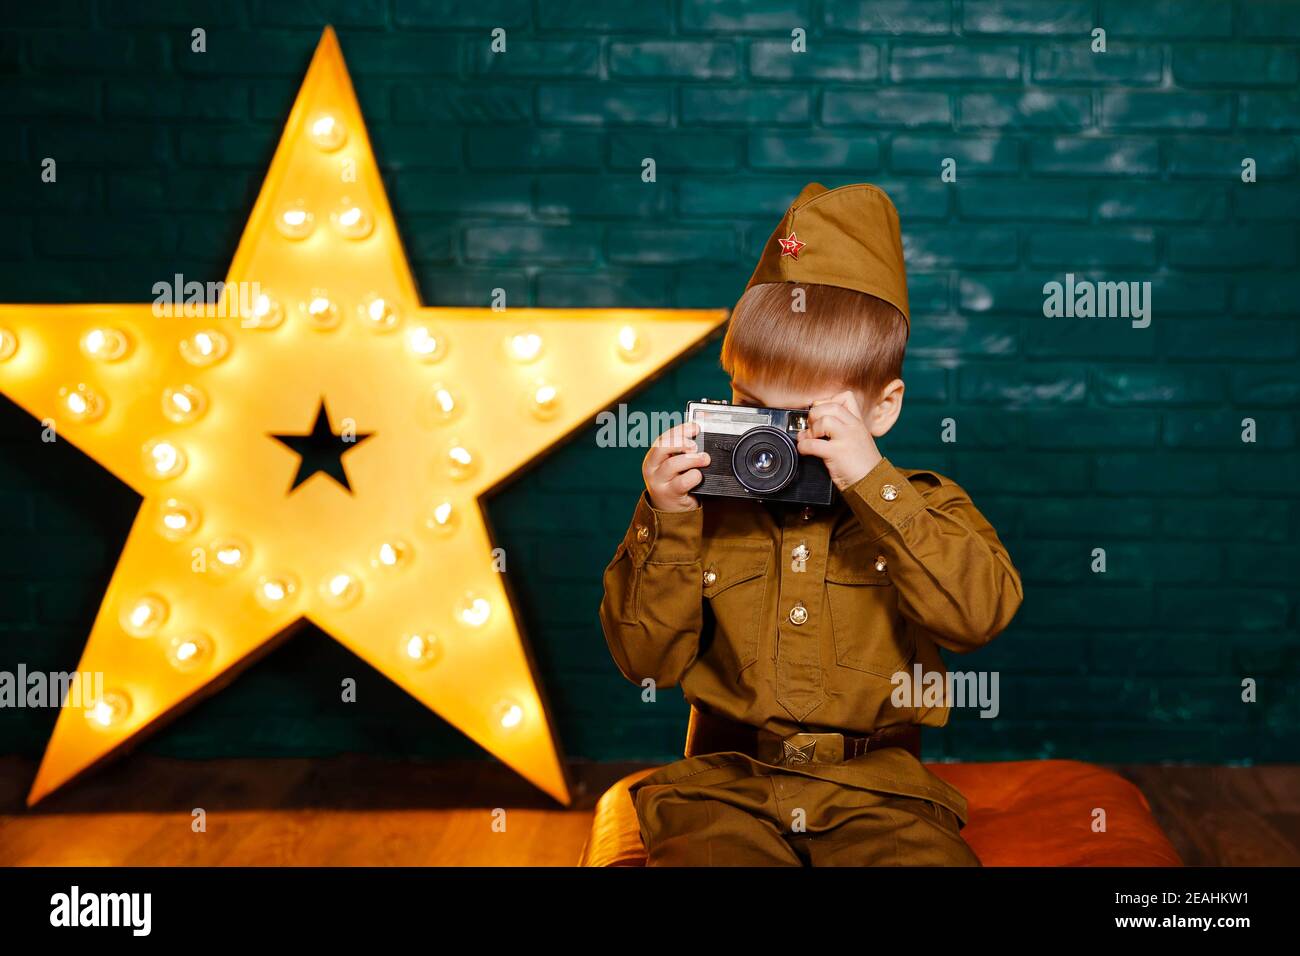 Soldier with film camera. Photographer with camera in his hands. Stock Photo